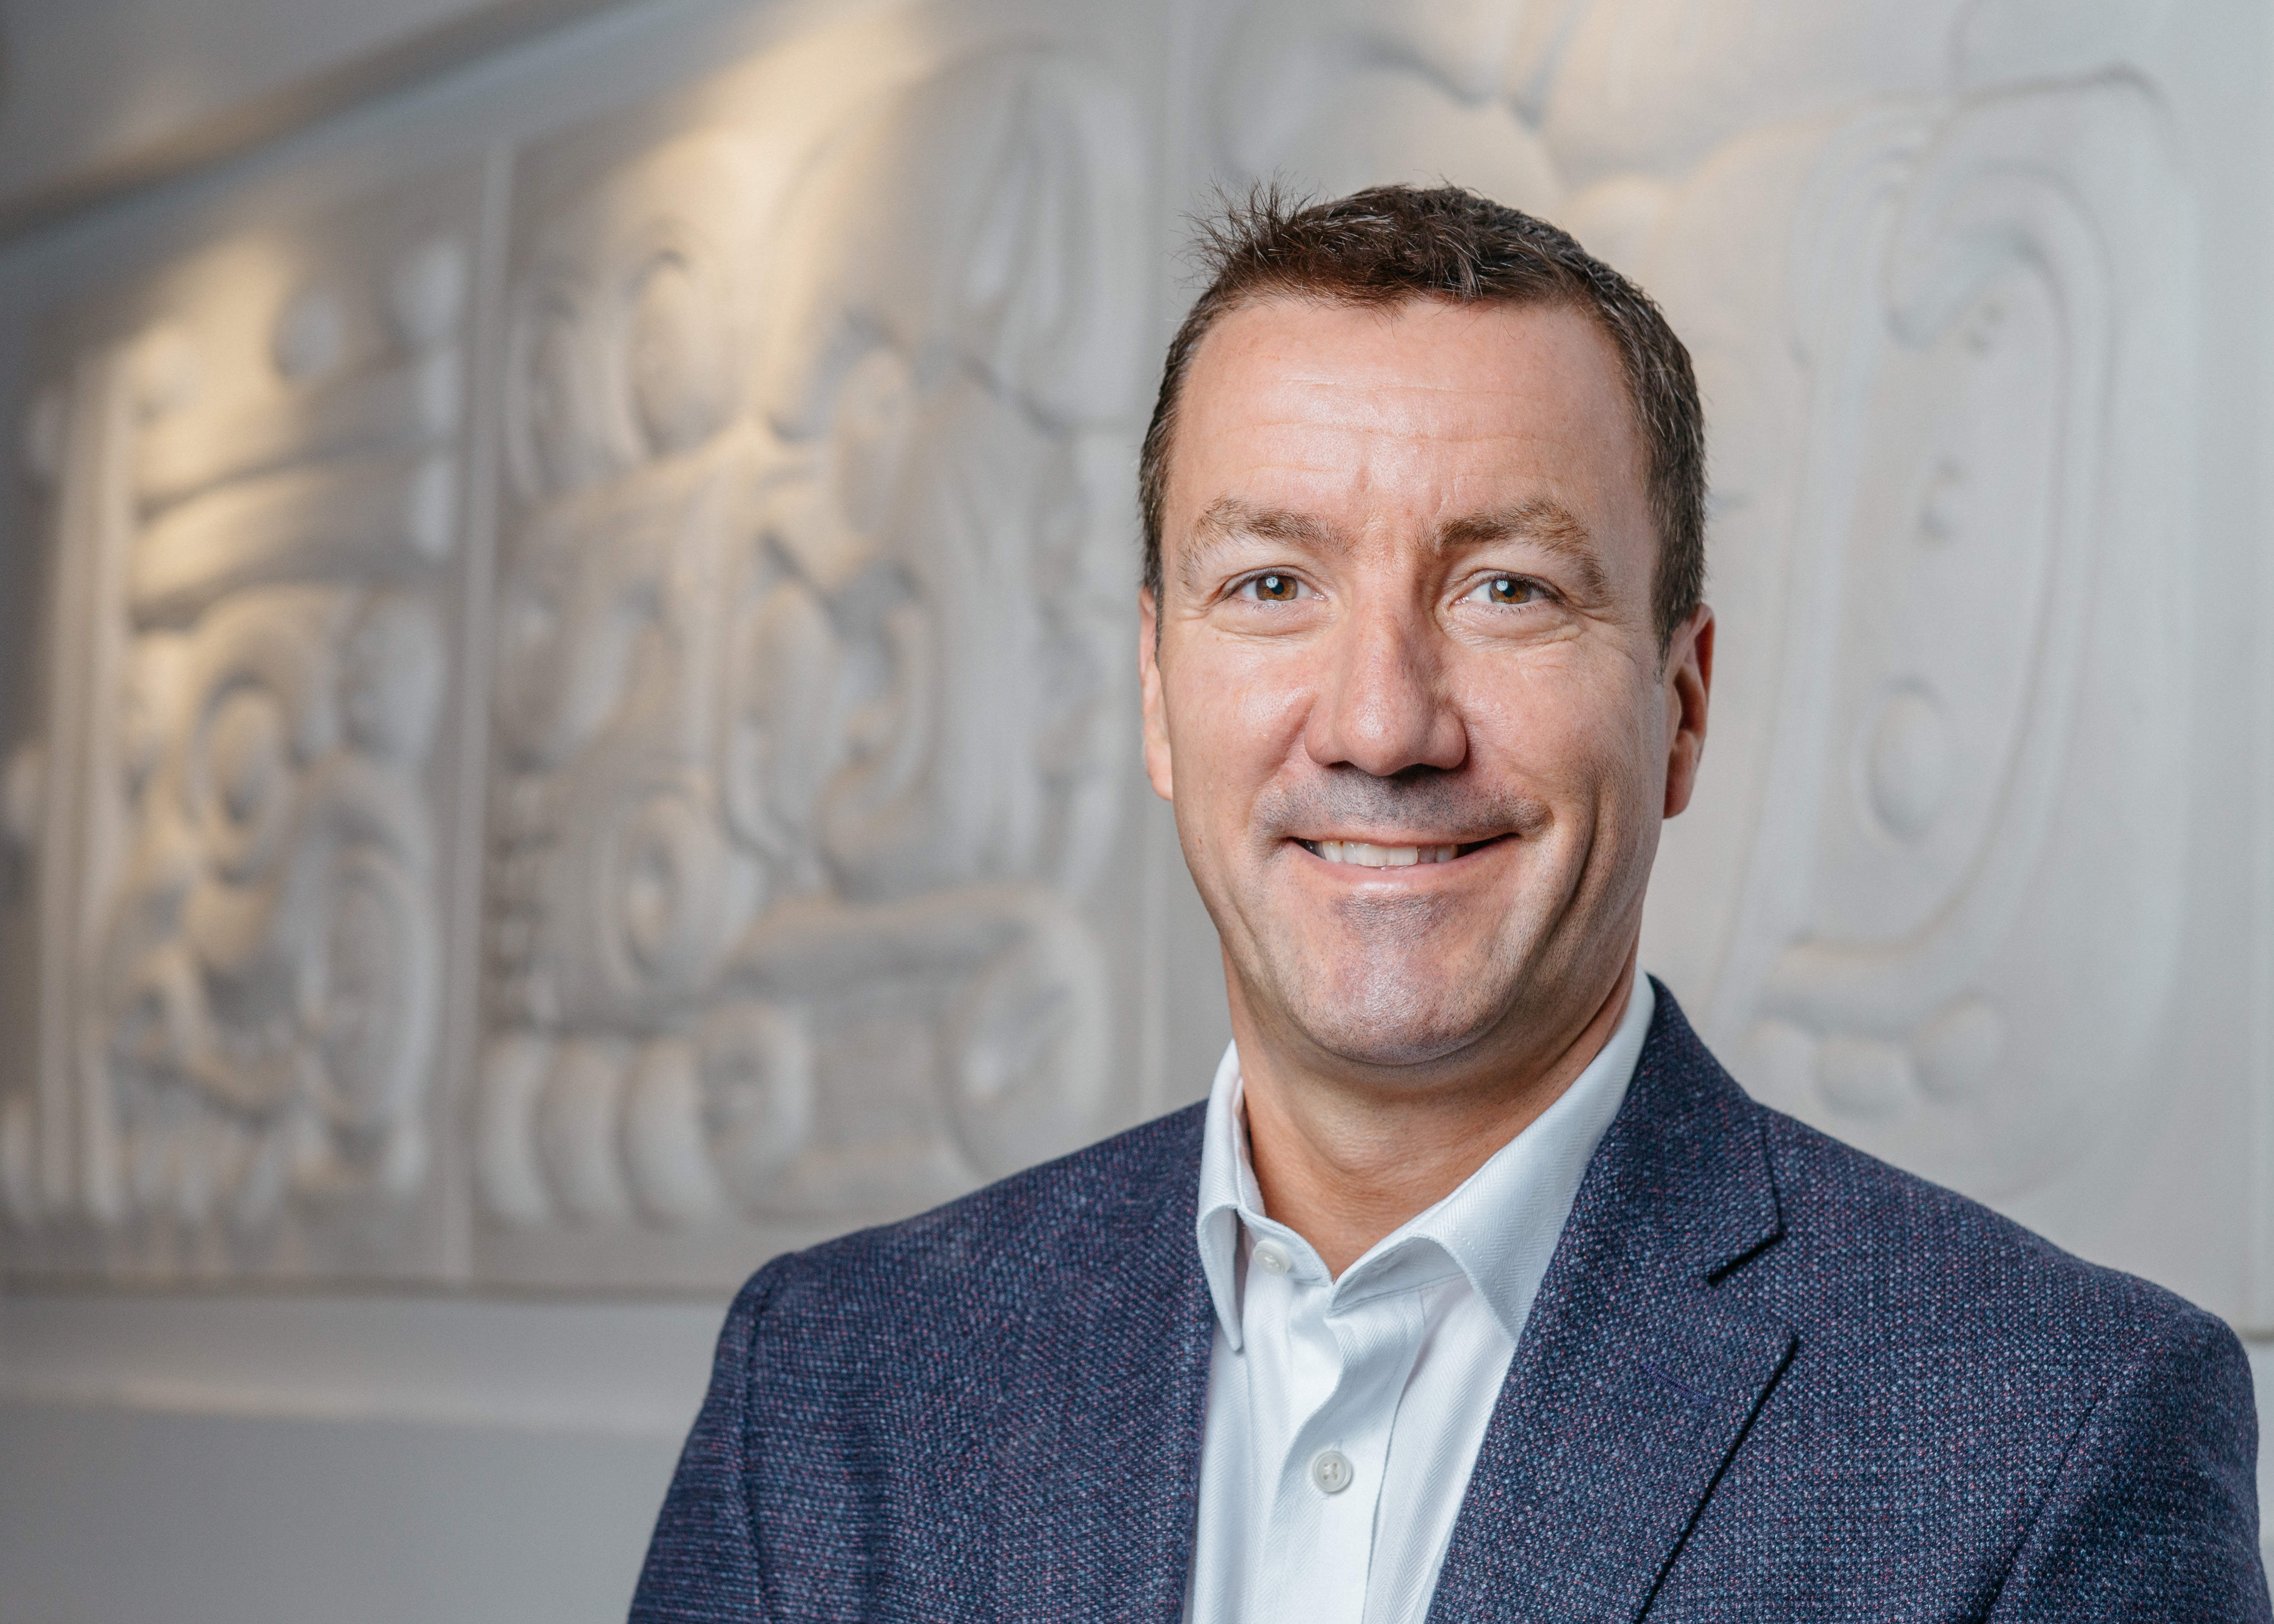 Interview Q&A - Jim Slater, managing director for Chipotle in Europe